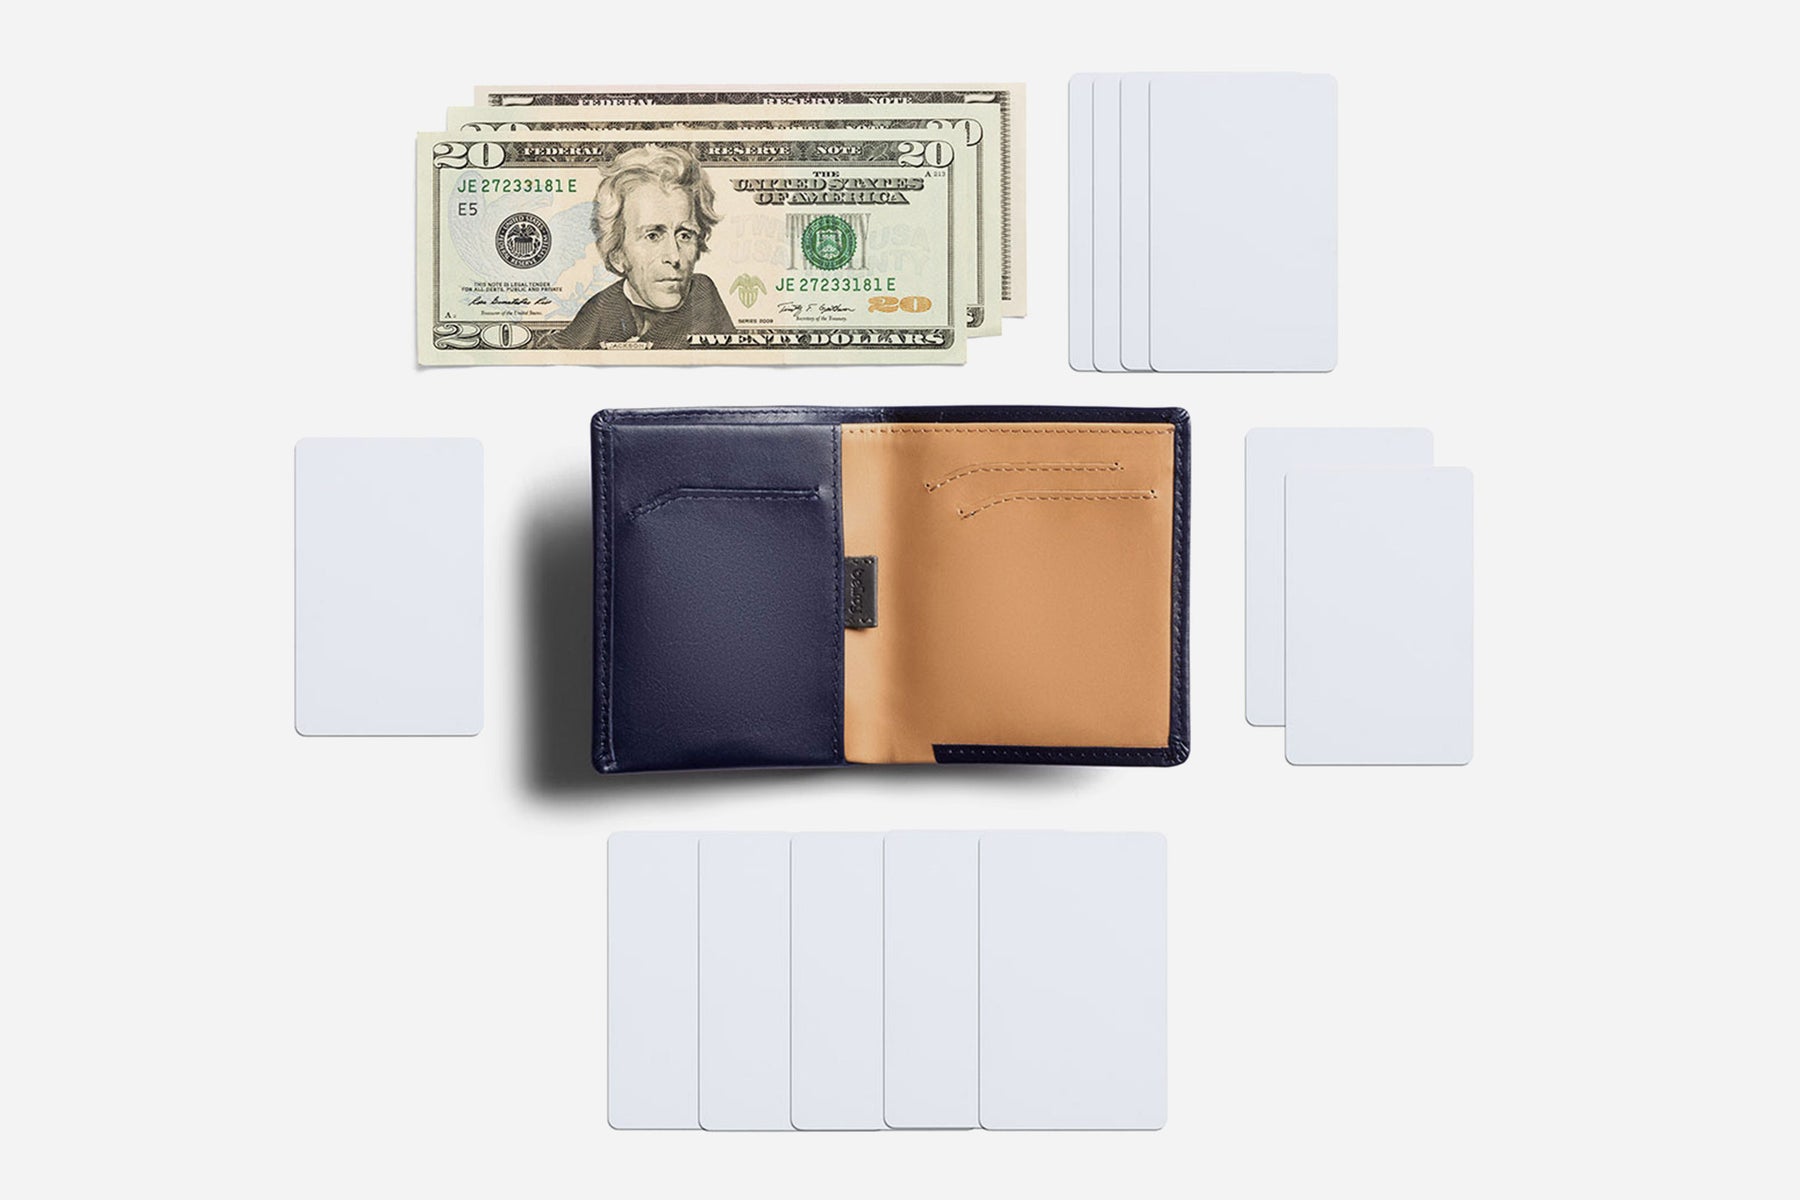 The Bellroy Note Sleeve Wallet, Slim, Clever & Simple